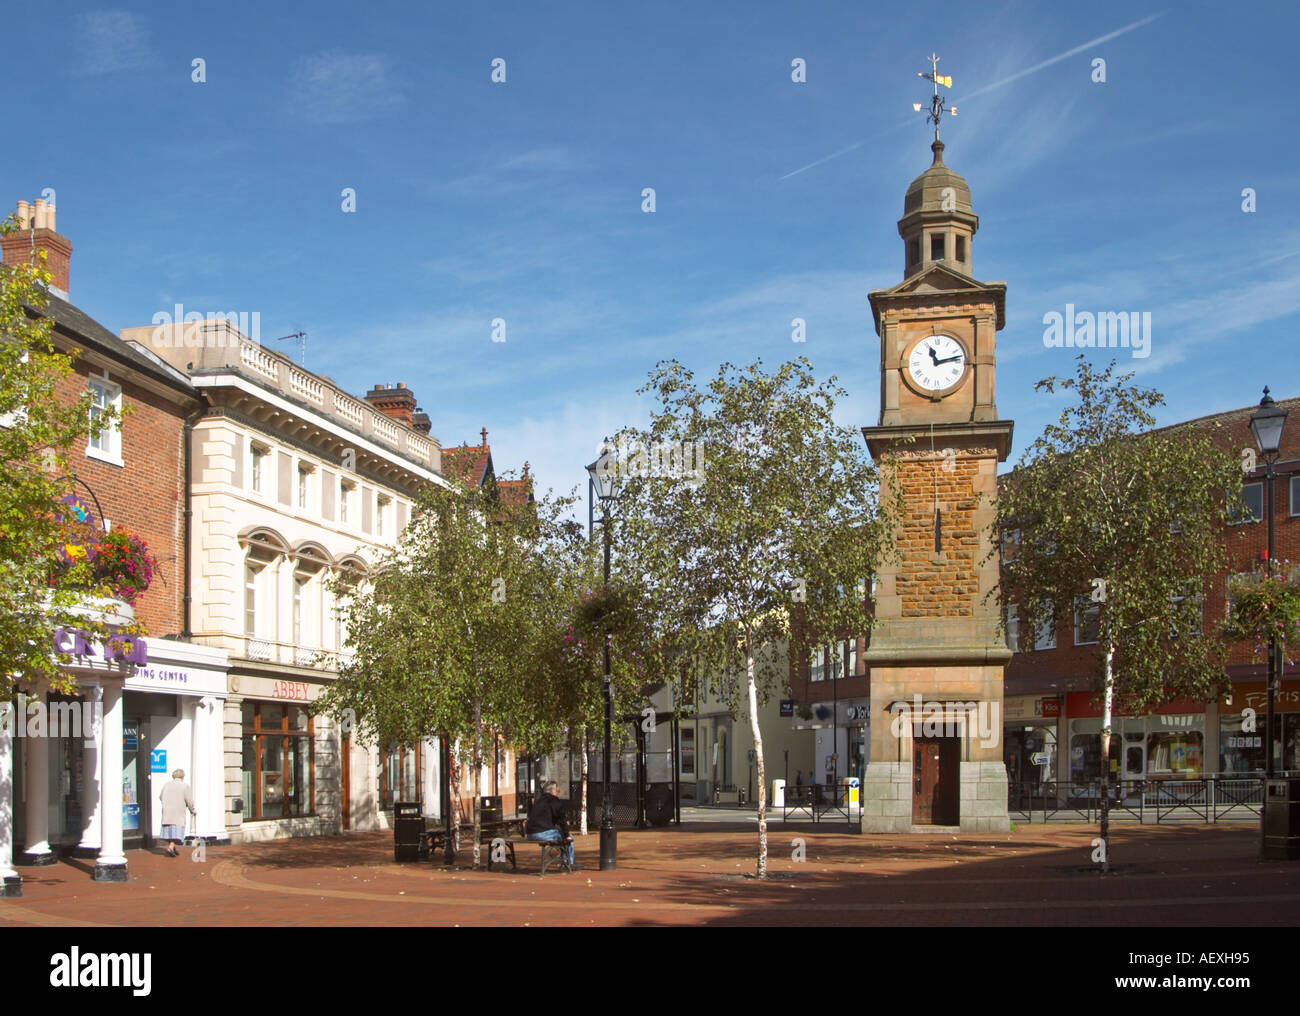 The Clock Tower Rugby Town Centre UK Stock Photo: 4495764 - Alamy